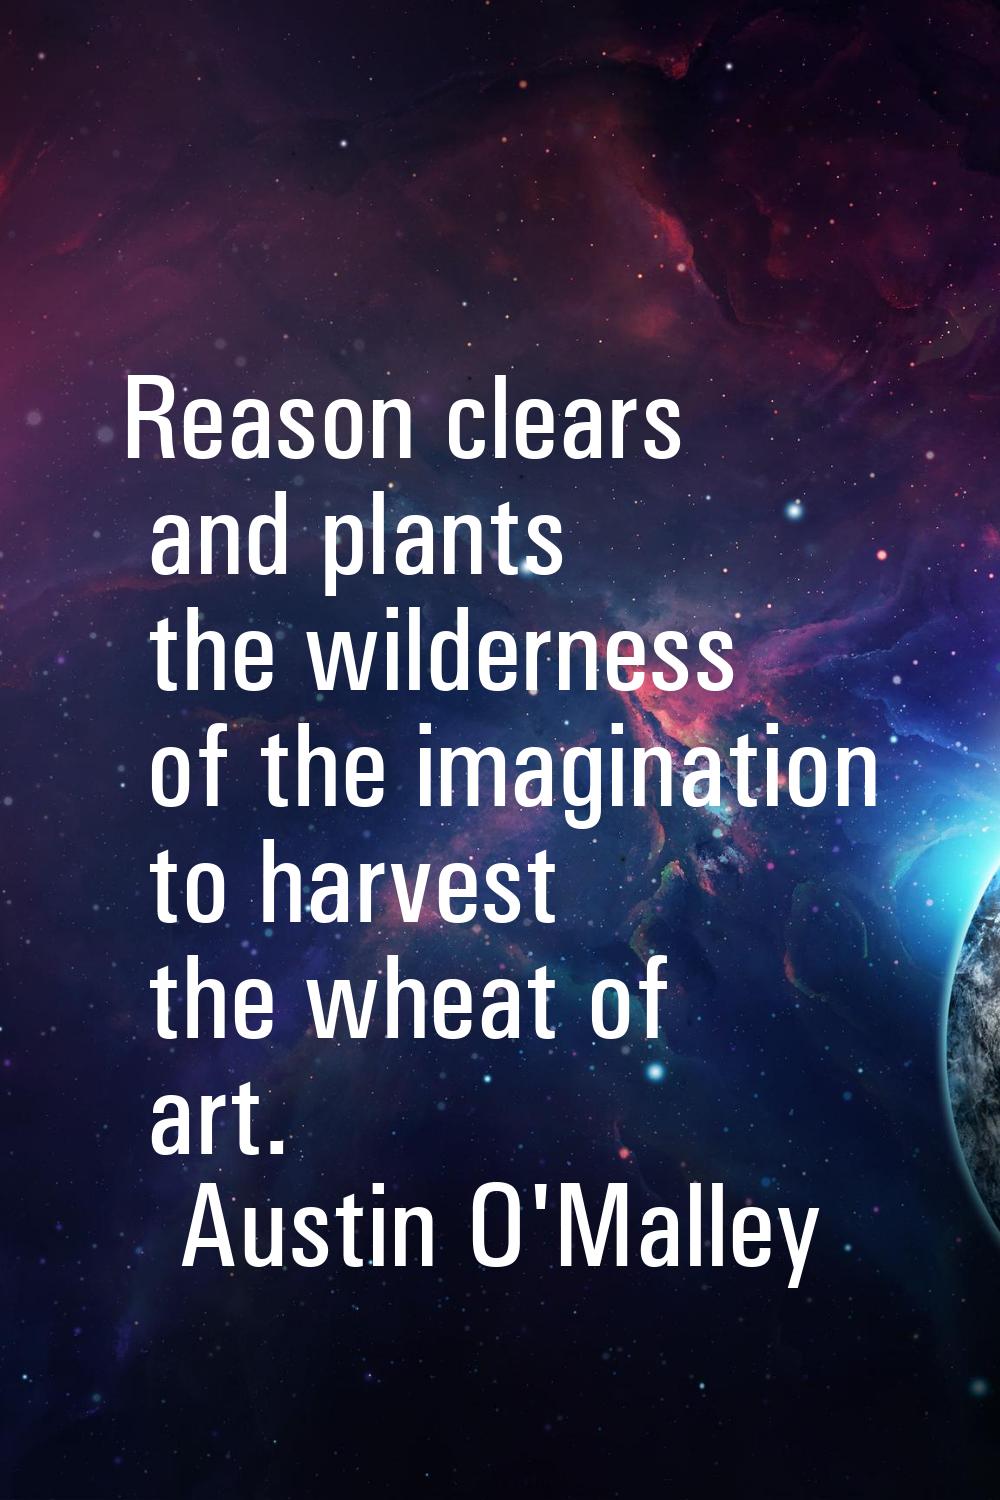 Reason clears and plants the wilderness of the imagination to harvest the wheat of art.